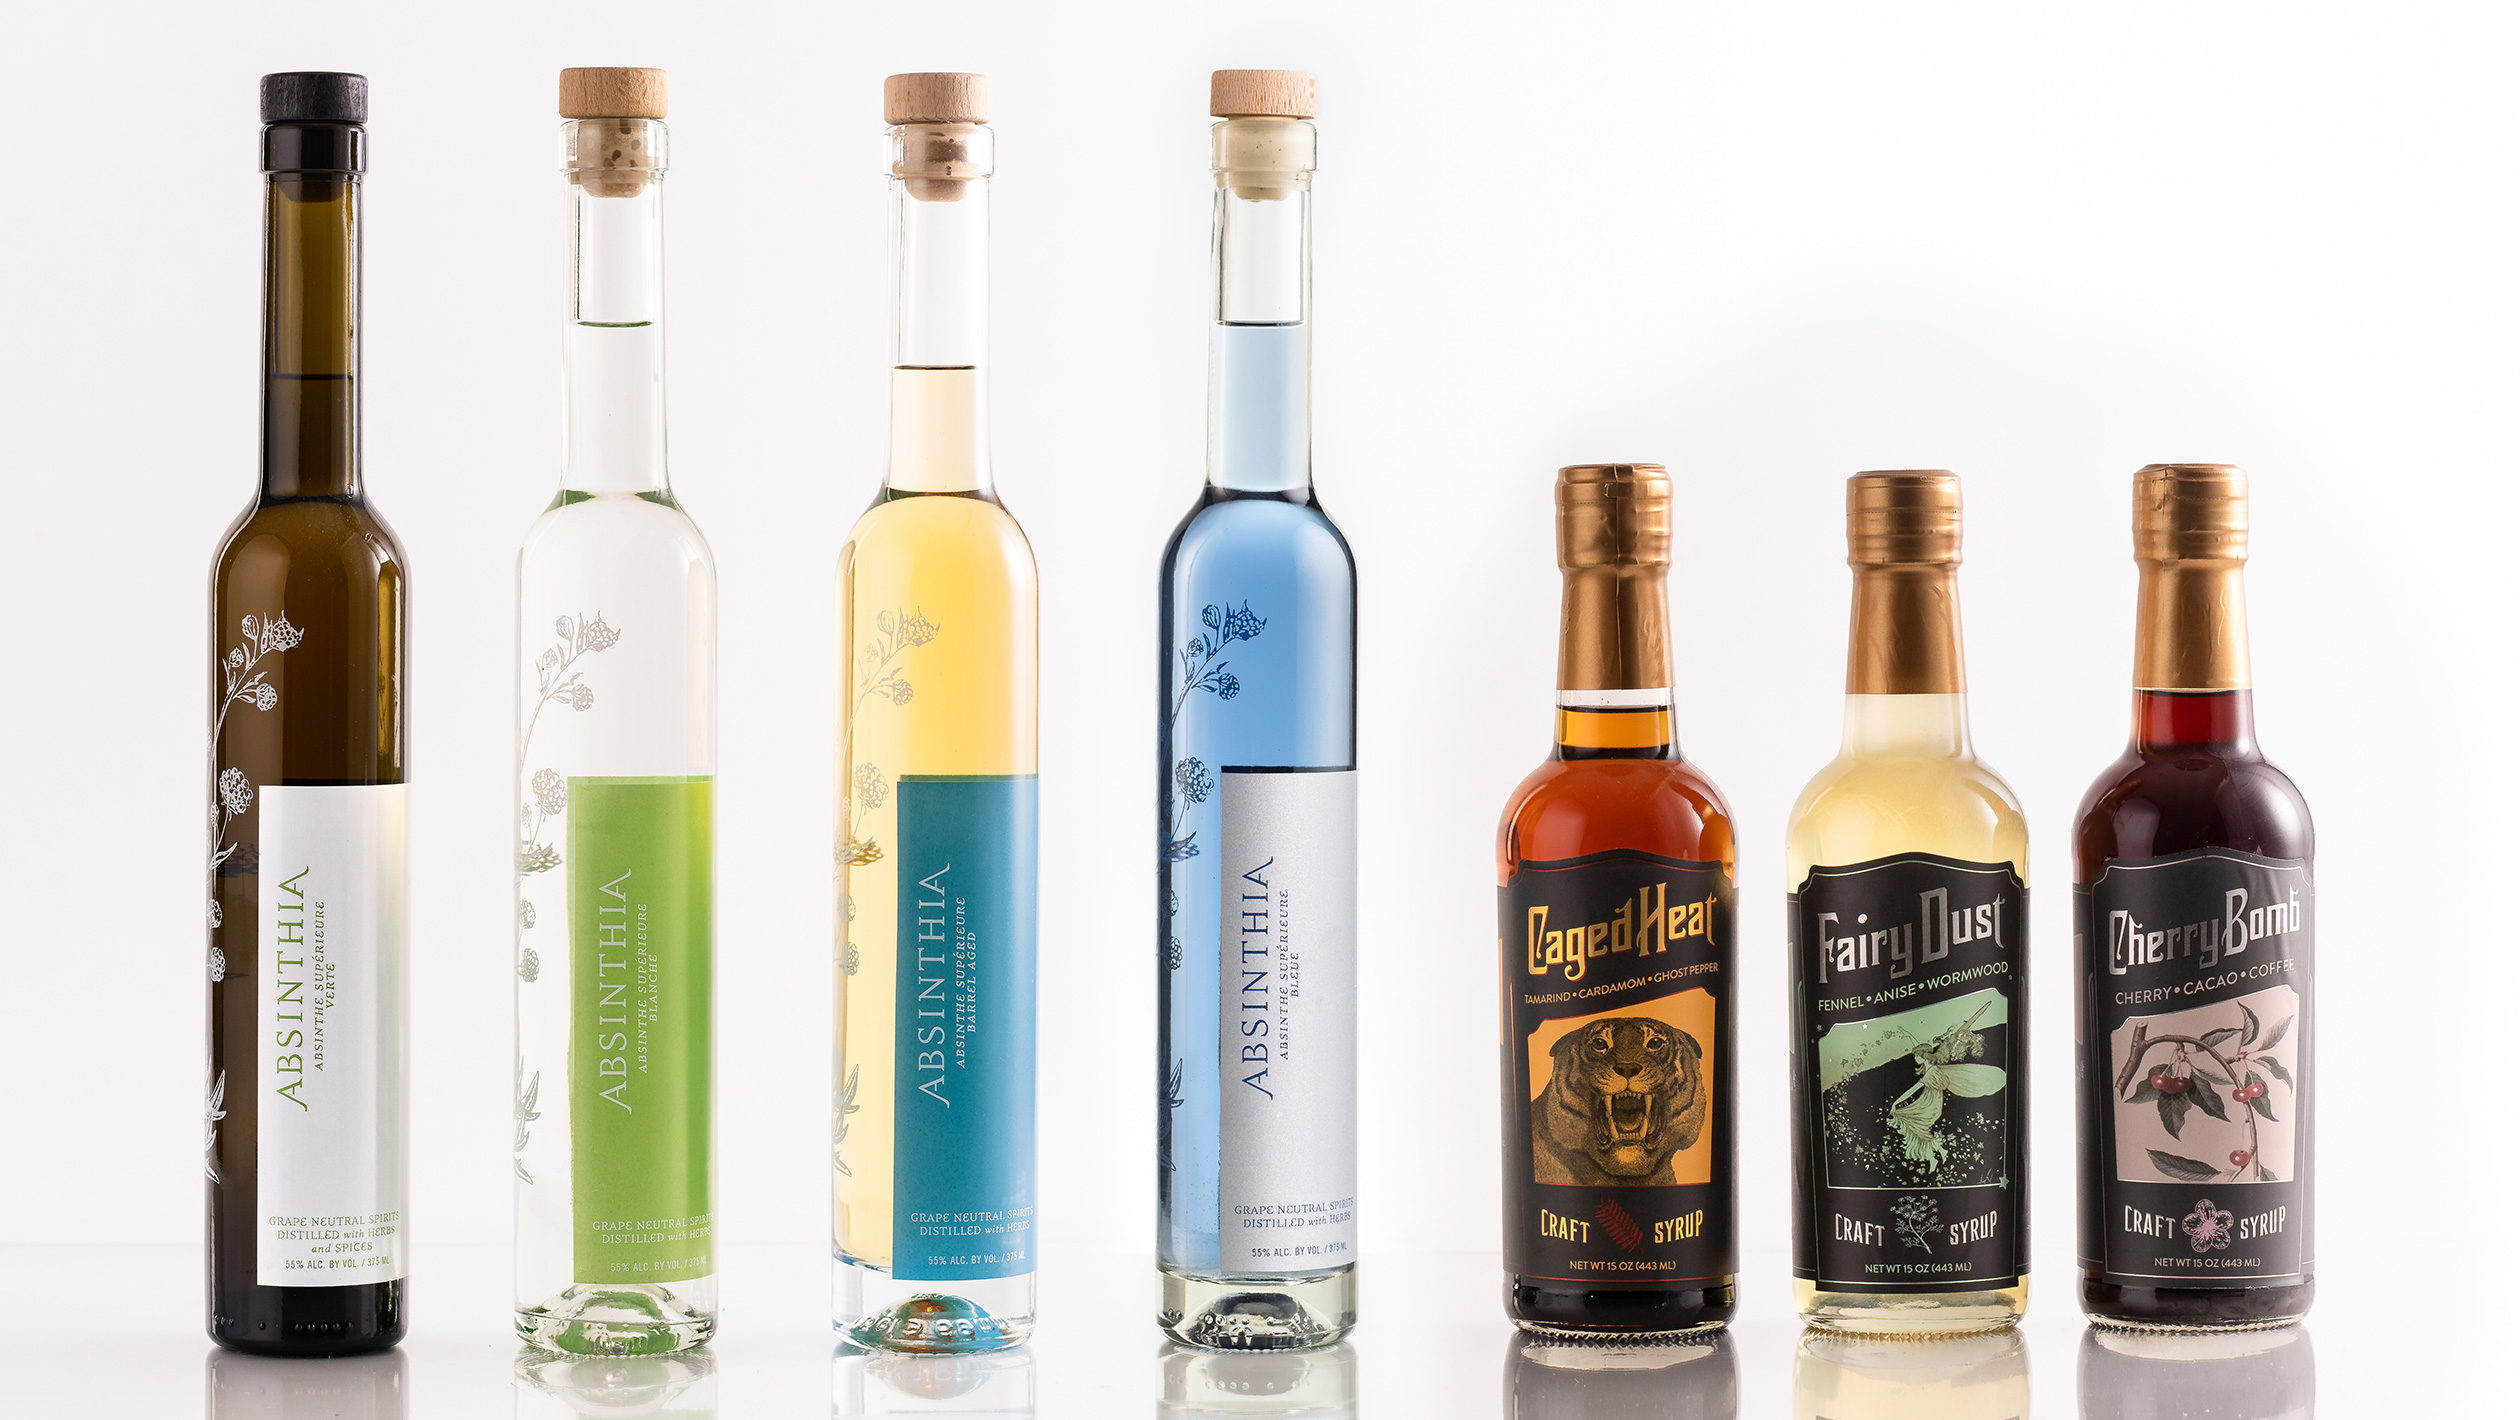 A lineup of Absinthia's spirits collection